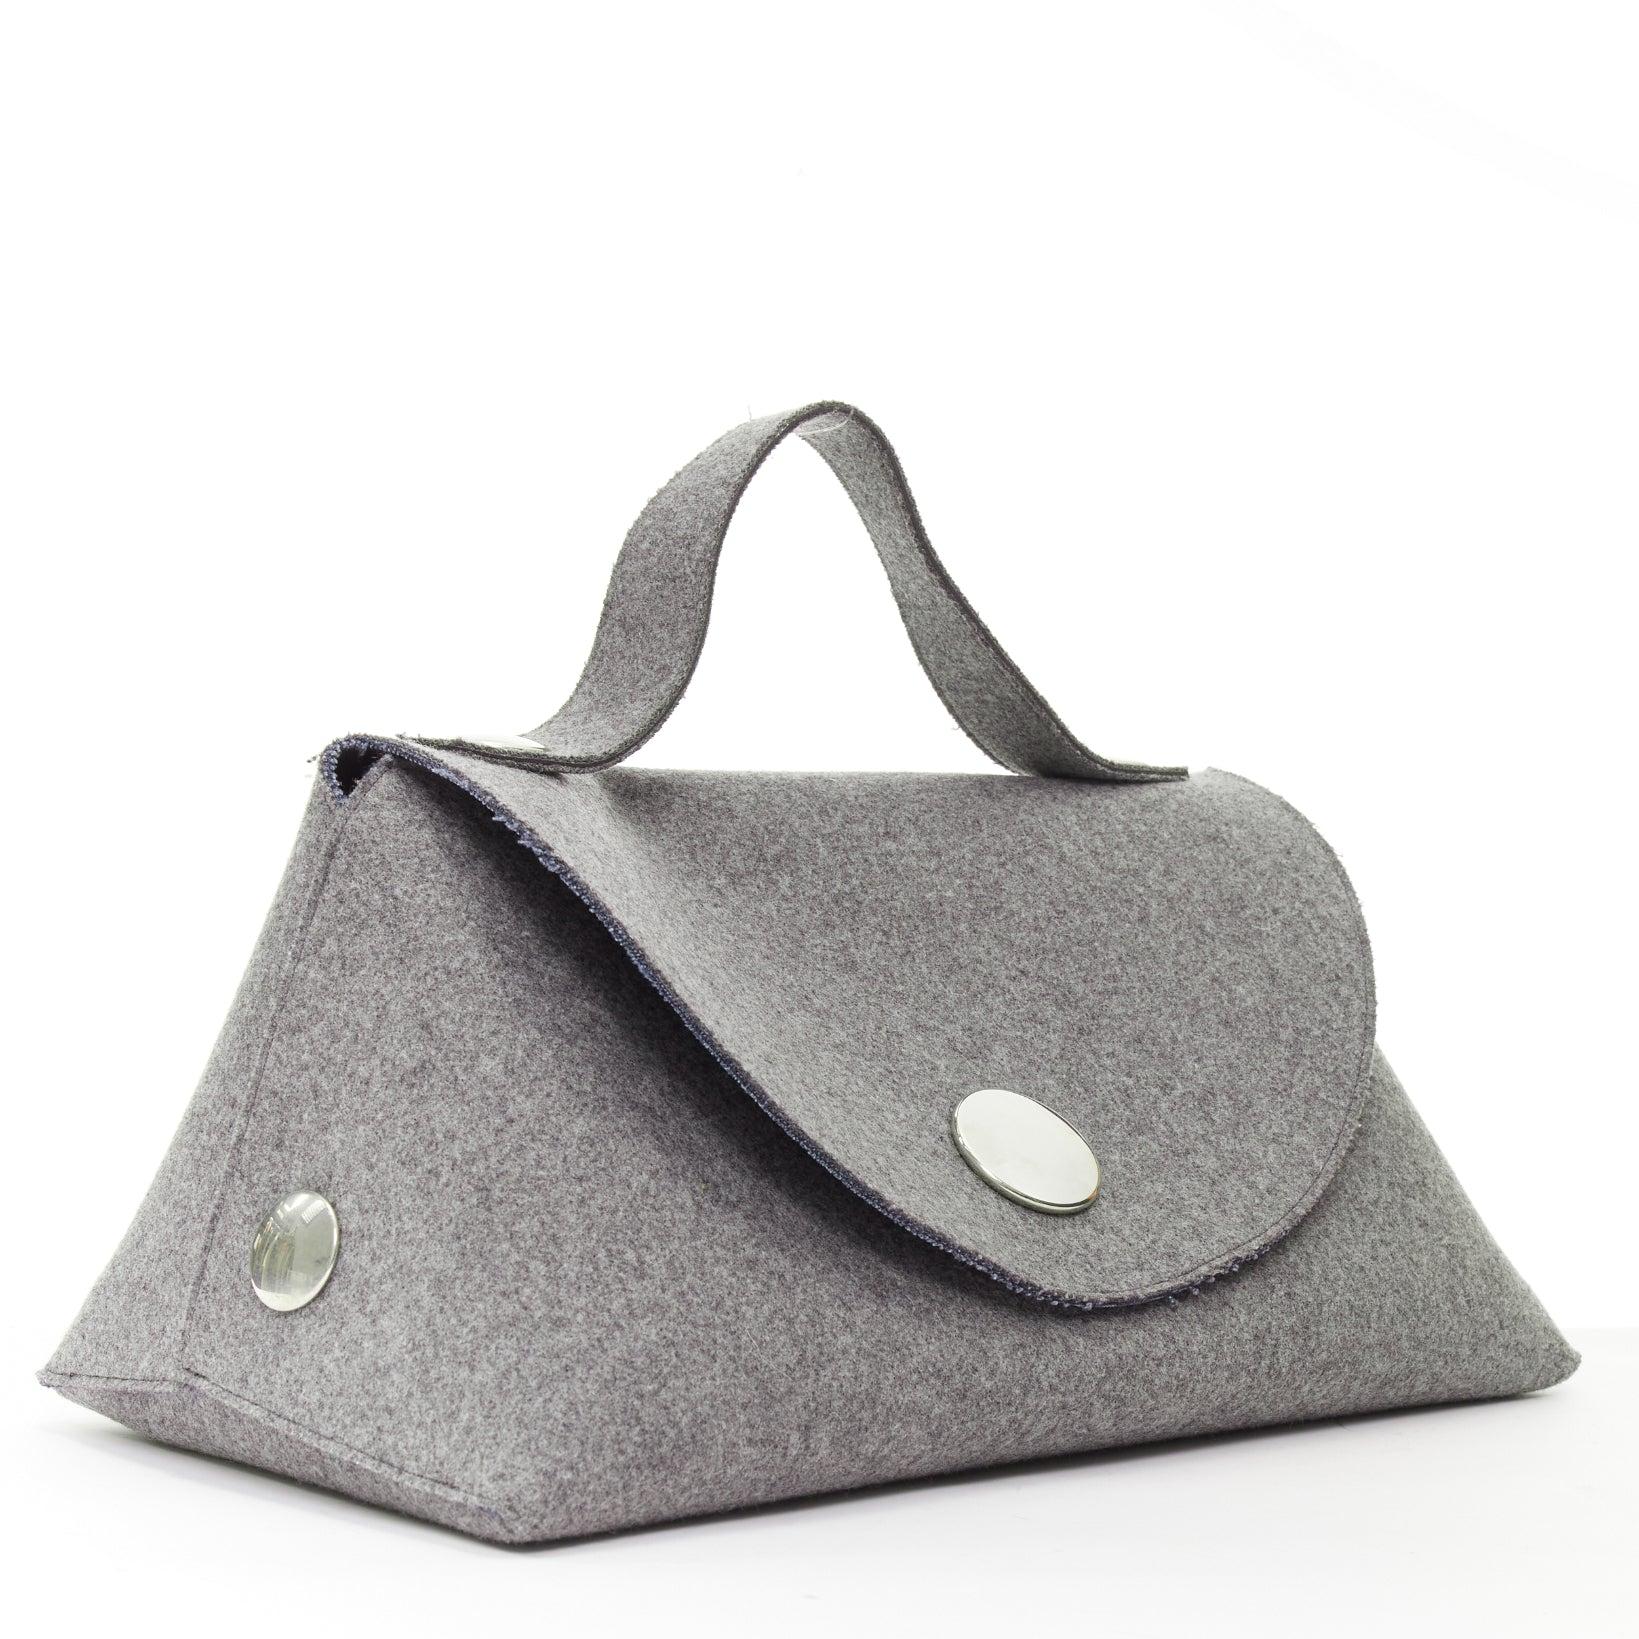 rare CELINE Phoebe Philo 2014 Runway Orb grey wool felt top handle bag
Reference: TGAS/D00982
Brand: Celine
Designer: Phoebe Philo
Model: Orb
Collection: 2014 - Runway
Material: Wool
Color: Grey, Silver
Pattern: Solid
Closure: Snap Buttons
Lining: